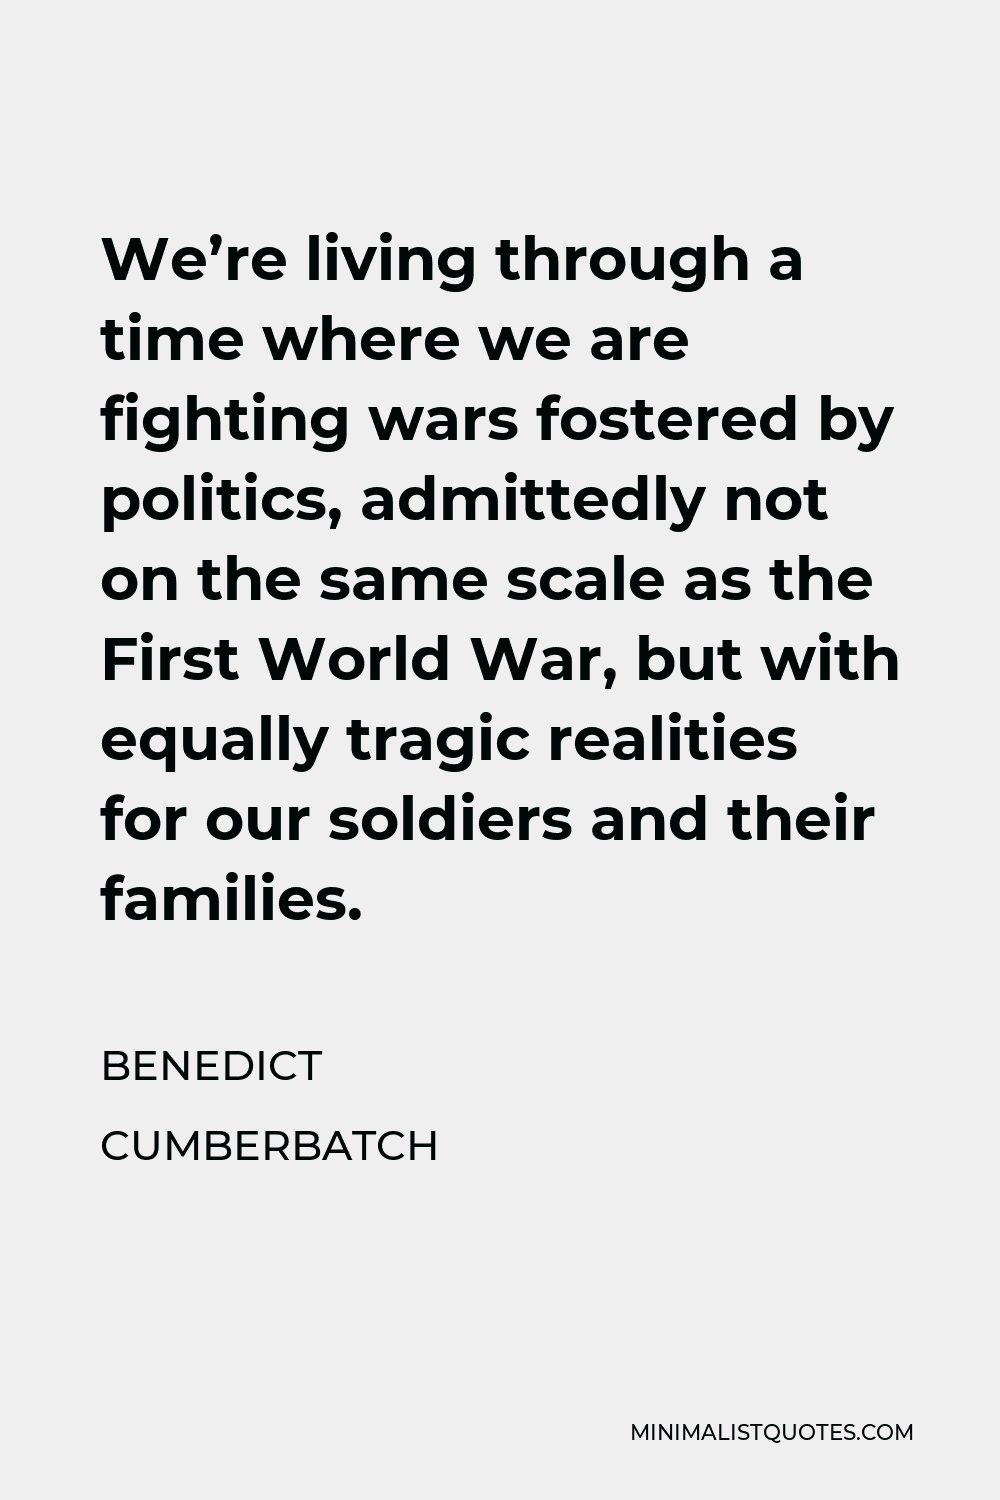 Benedict Cumberbatch Quote - We’re living through a time where we are fighting wars fostered by politics, admittedly not on the same scale as the First World War, but with equally tragic realities for our soldiers and their families.